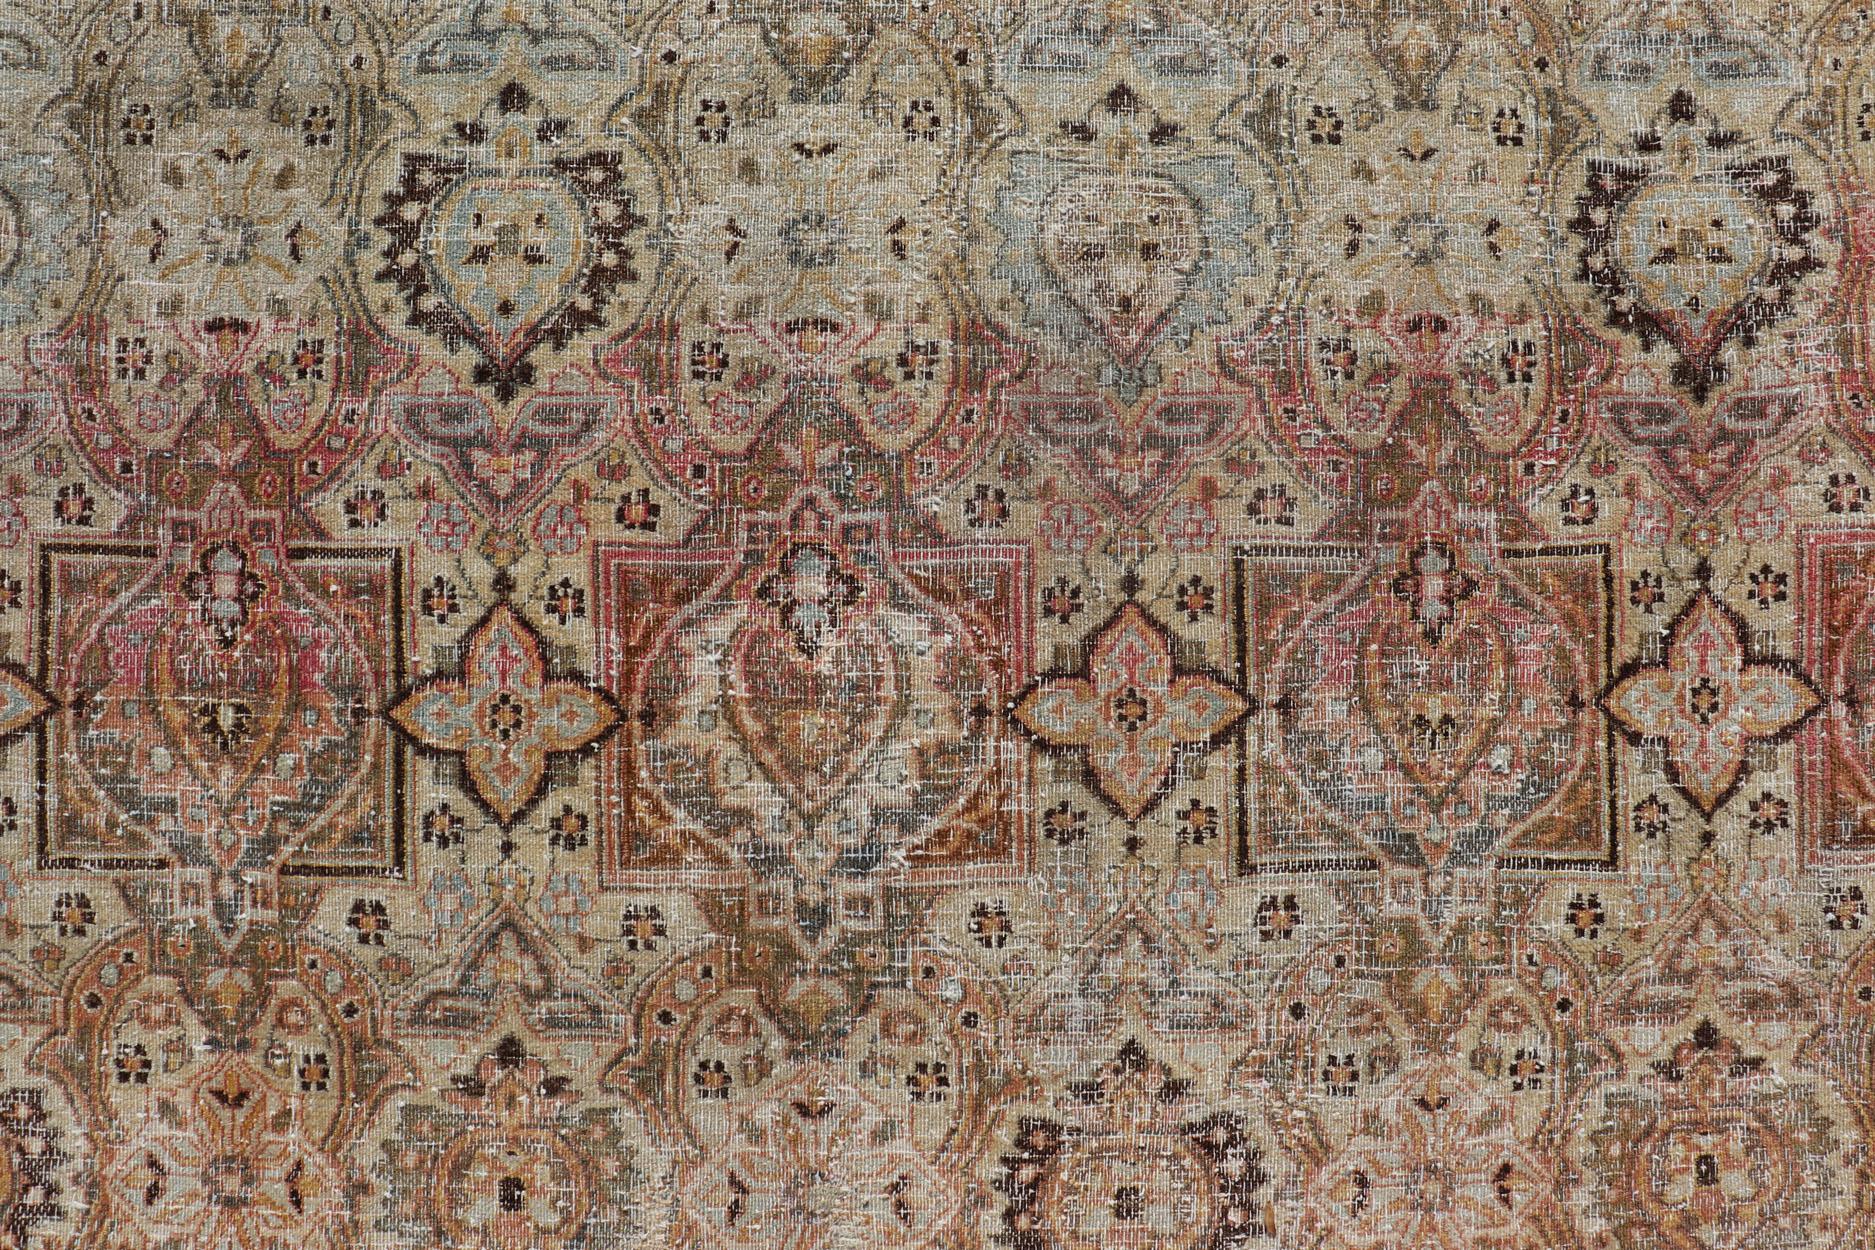  Antique Persian Khorassan Rug with Palmettes, Geometric Flowers in Soft Tones For Sale 5